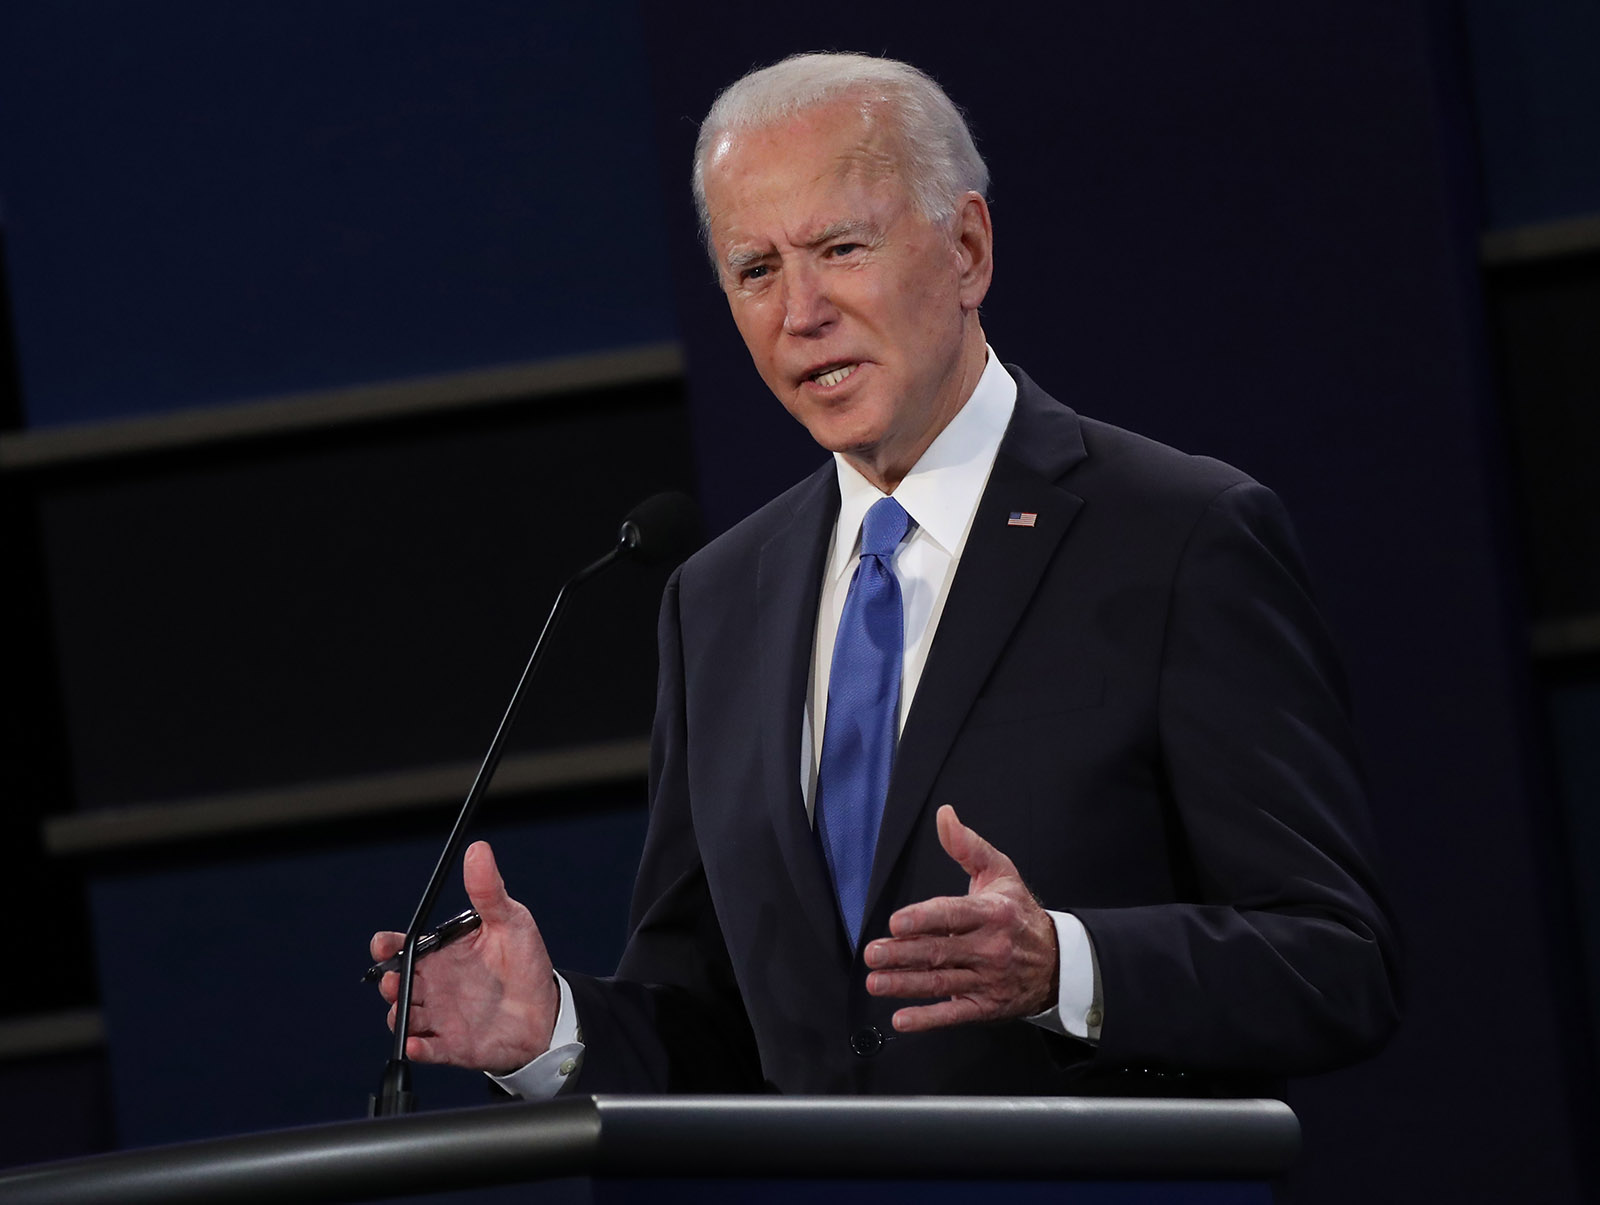 Biden "Anyone who's responsible for that many deaths should not remain